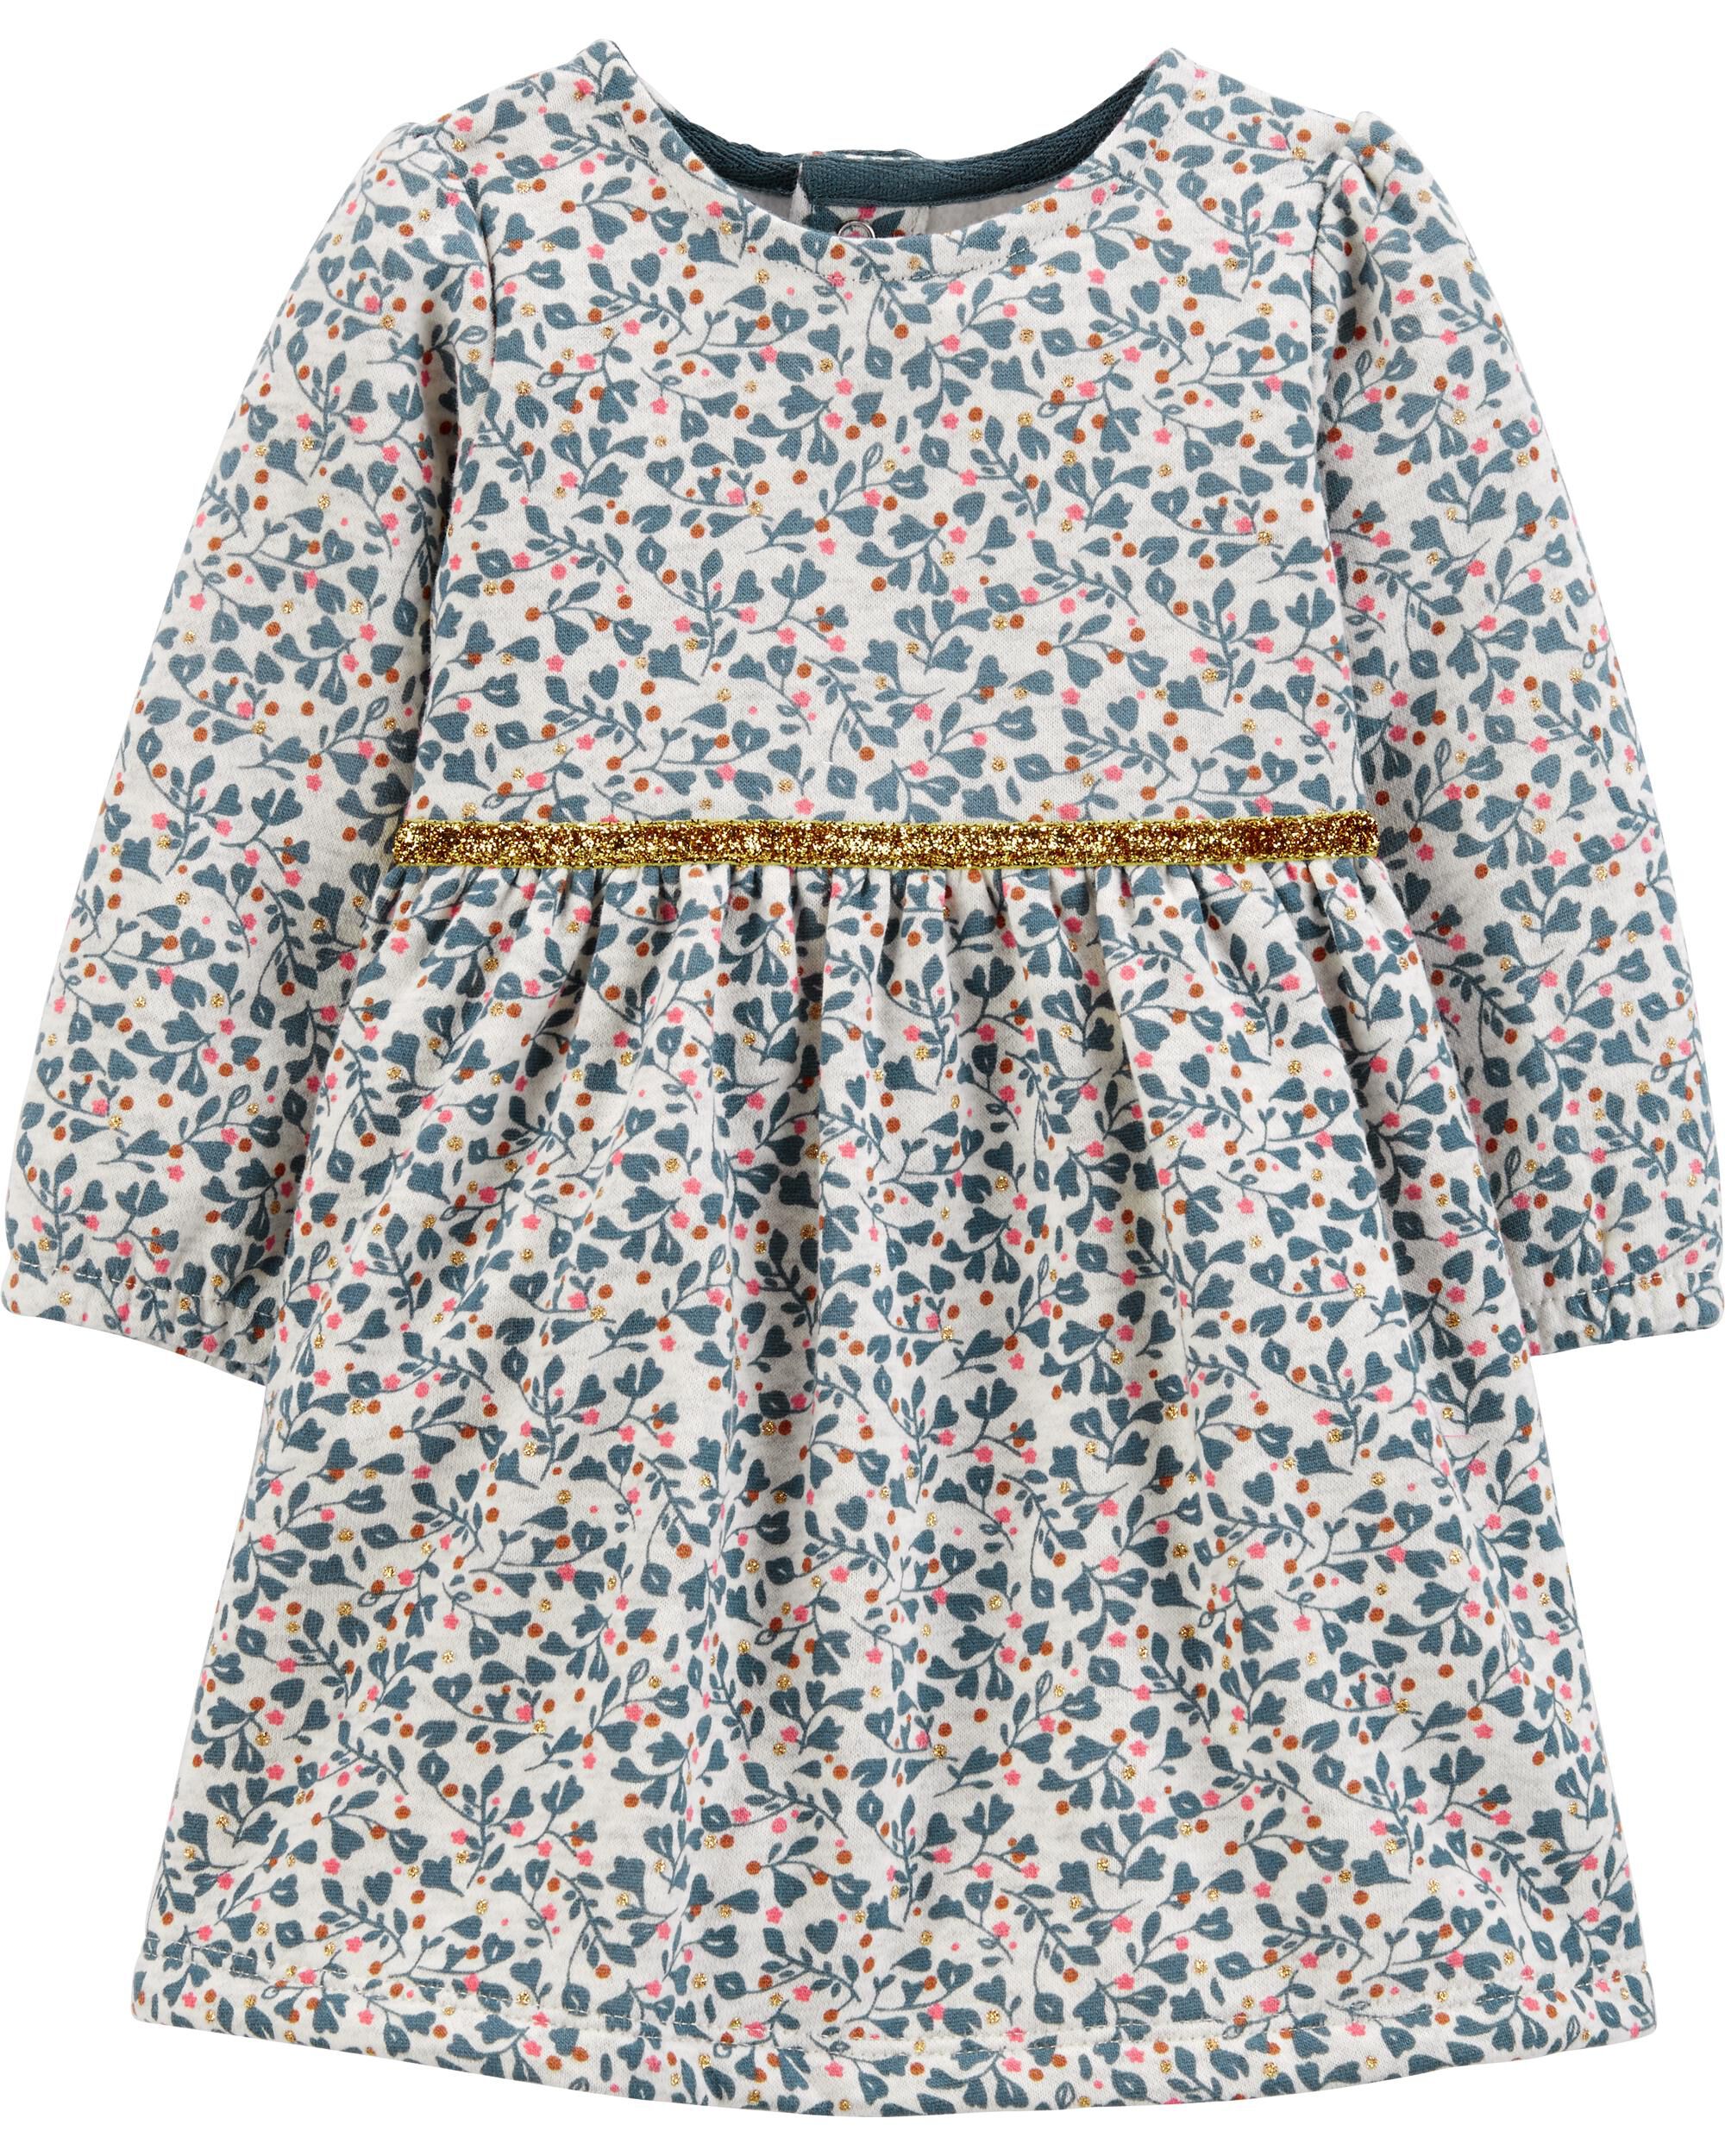 carters baby girl holiday dresses